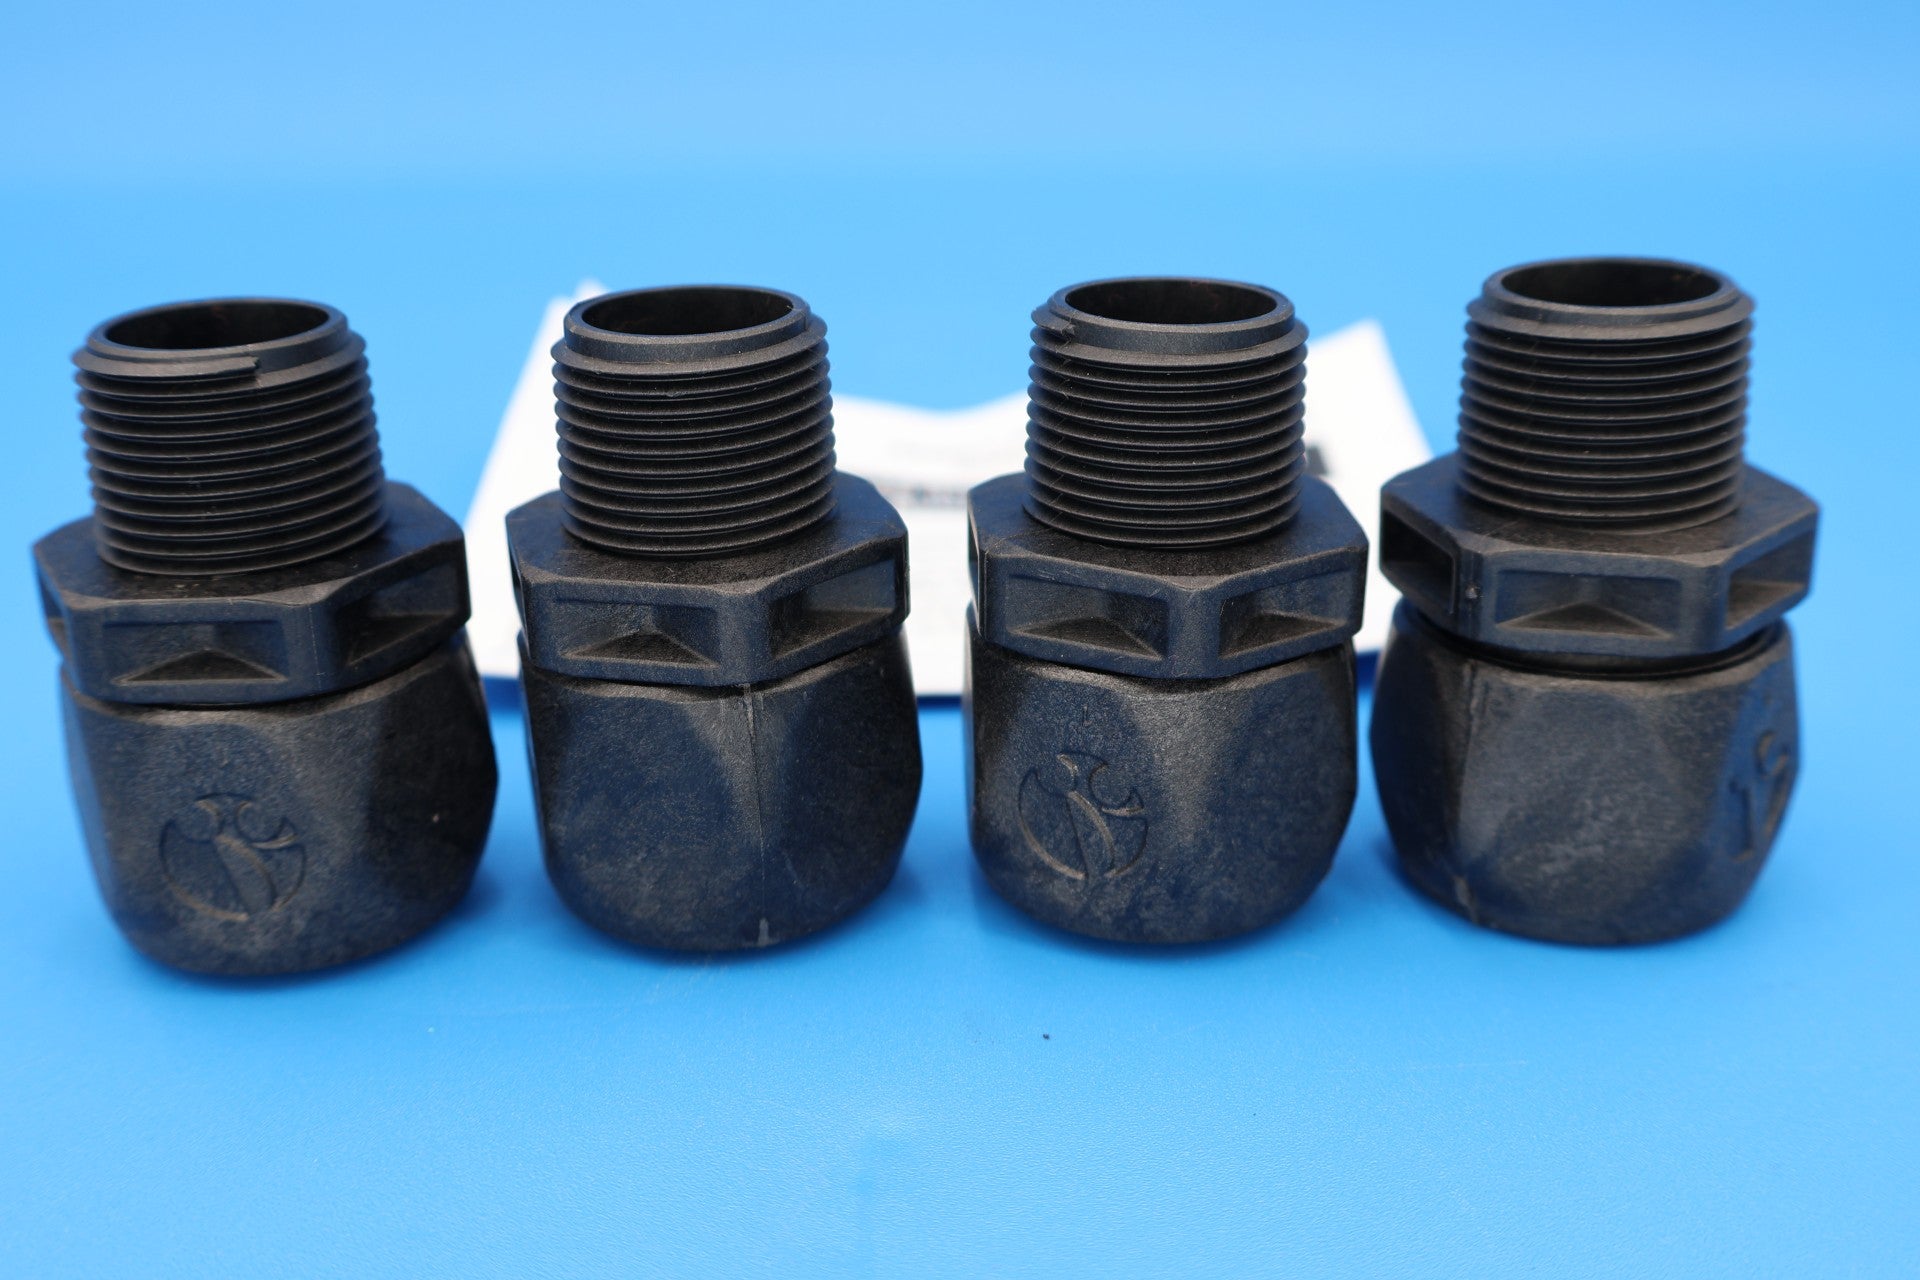 Jandy (Polaris) Booster Pump Black Quick Connect Fittings 4-Pack R0621000 - Pool Pump Parts - img-4